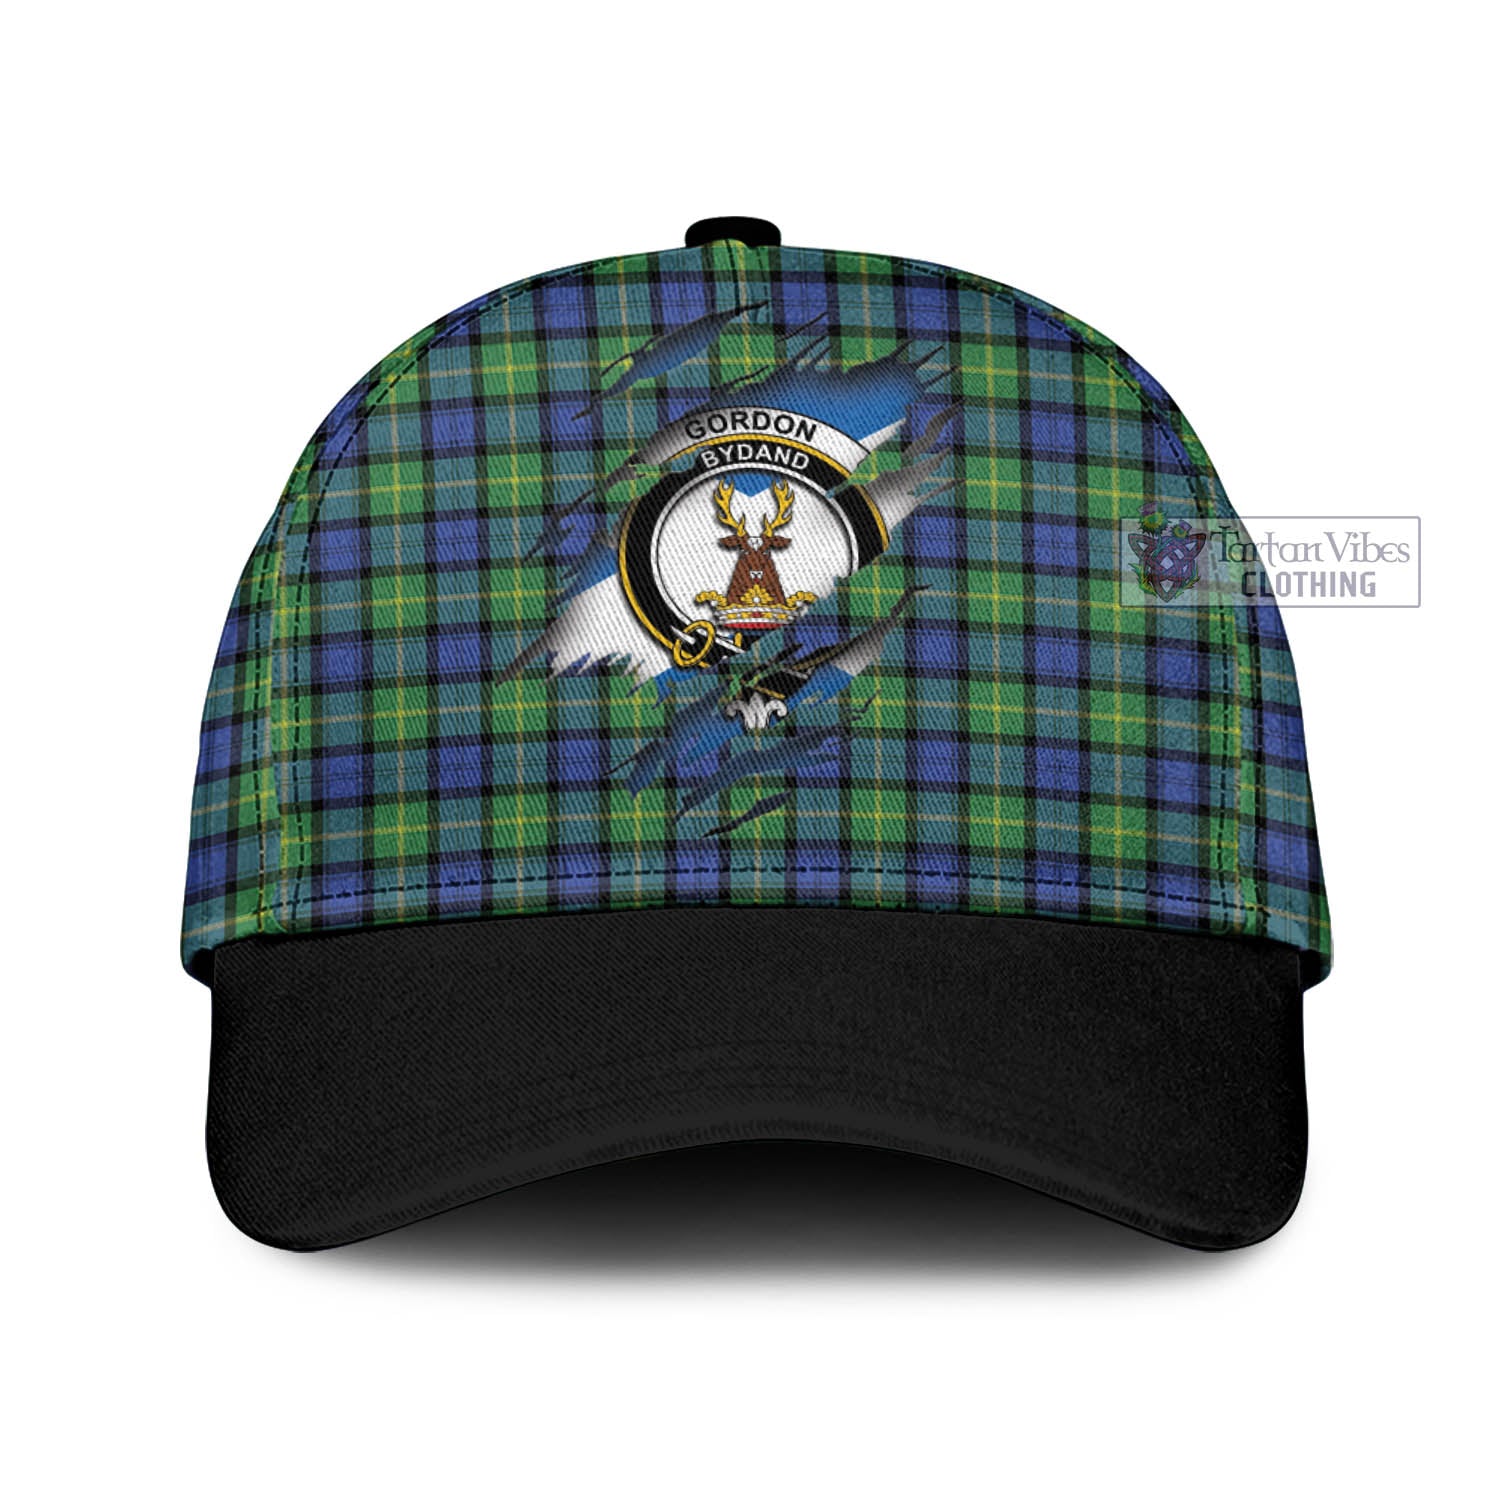 Tartan Vibes Clothing Gordon Old Ancient Tartan Classic Cap with Family Crest In Me Style